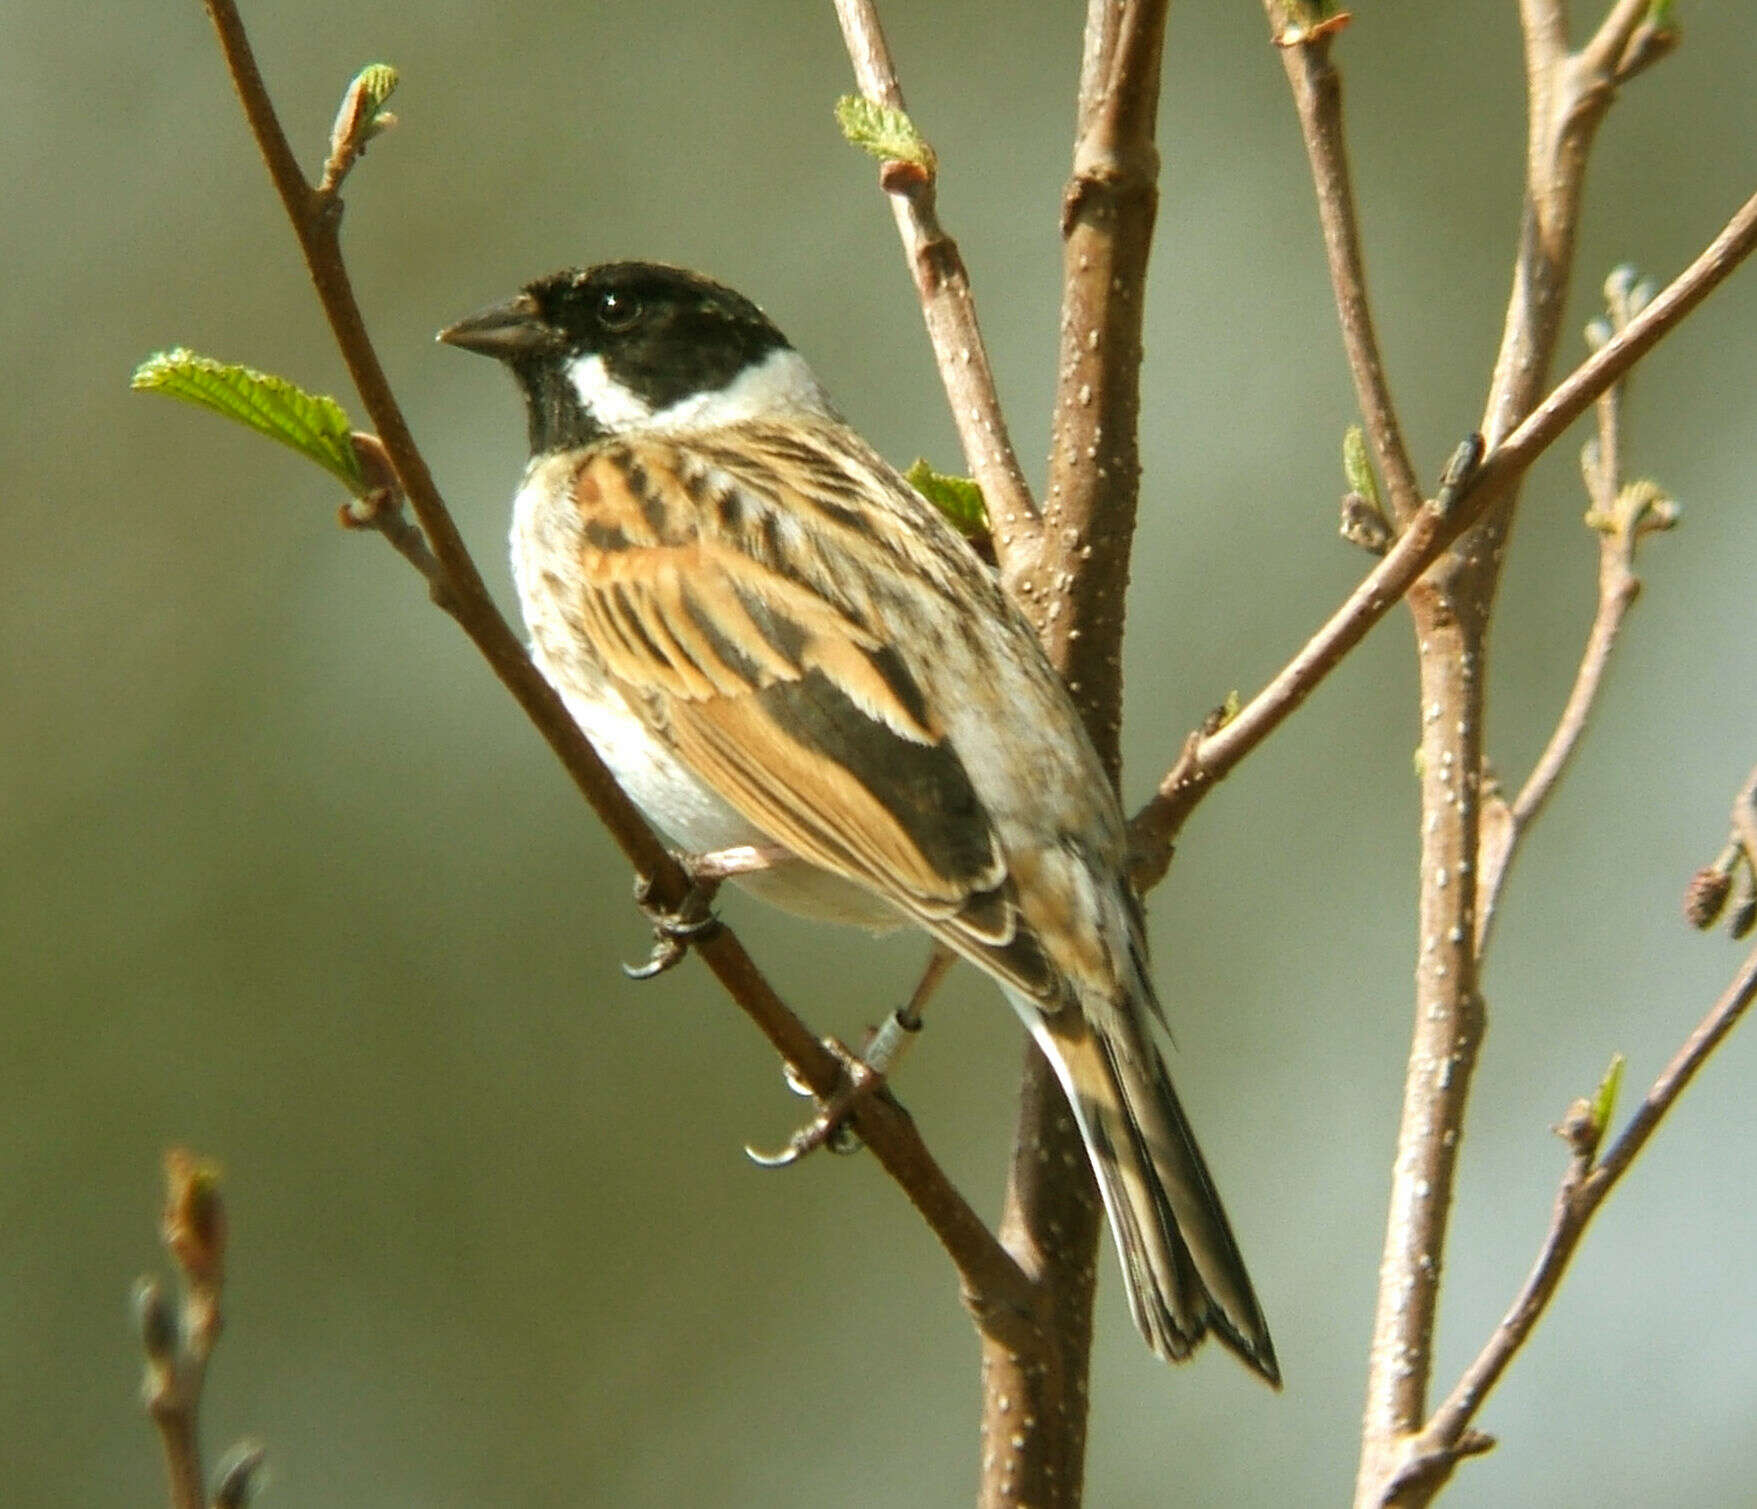 Image of New World sparrows